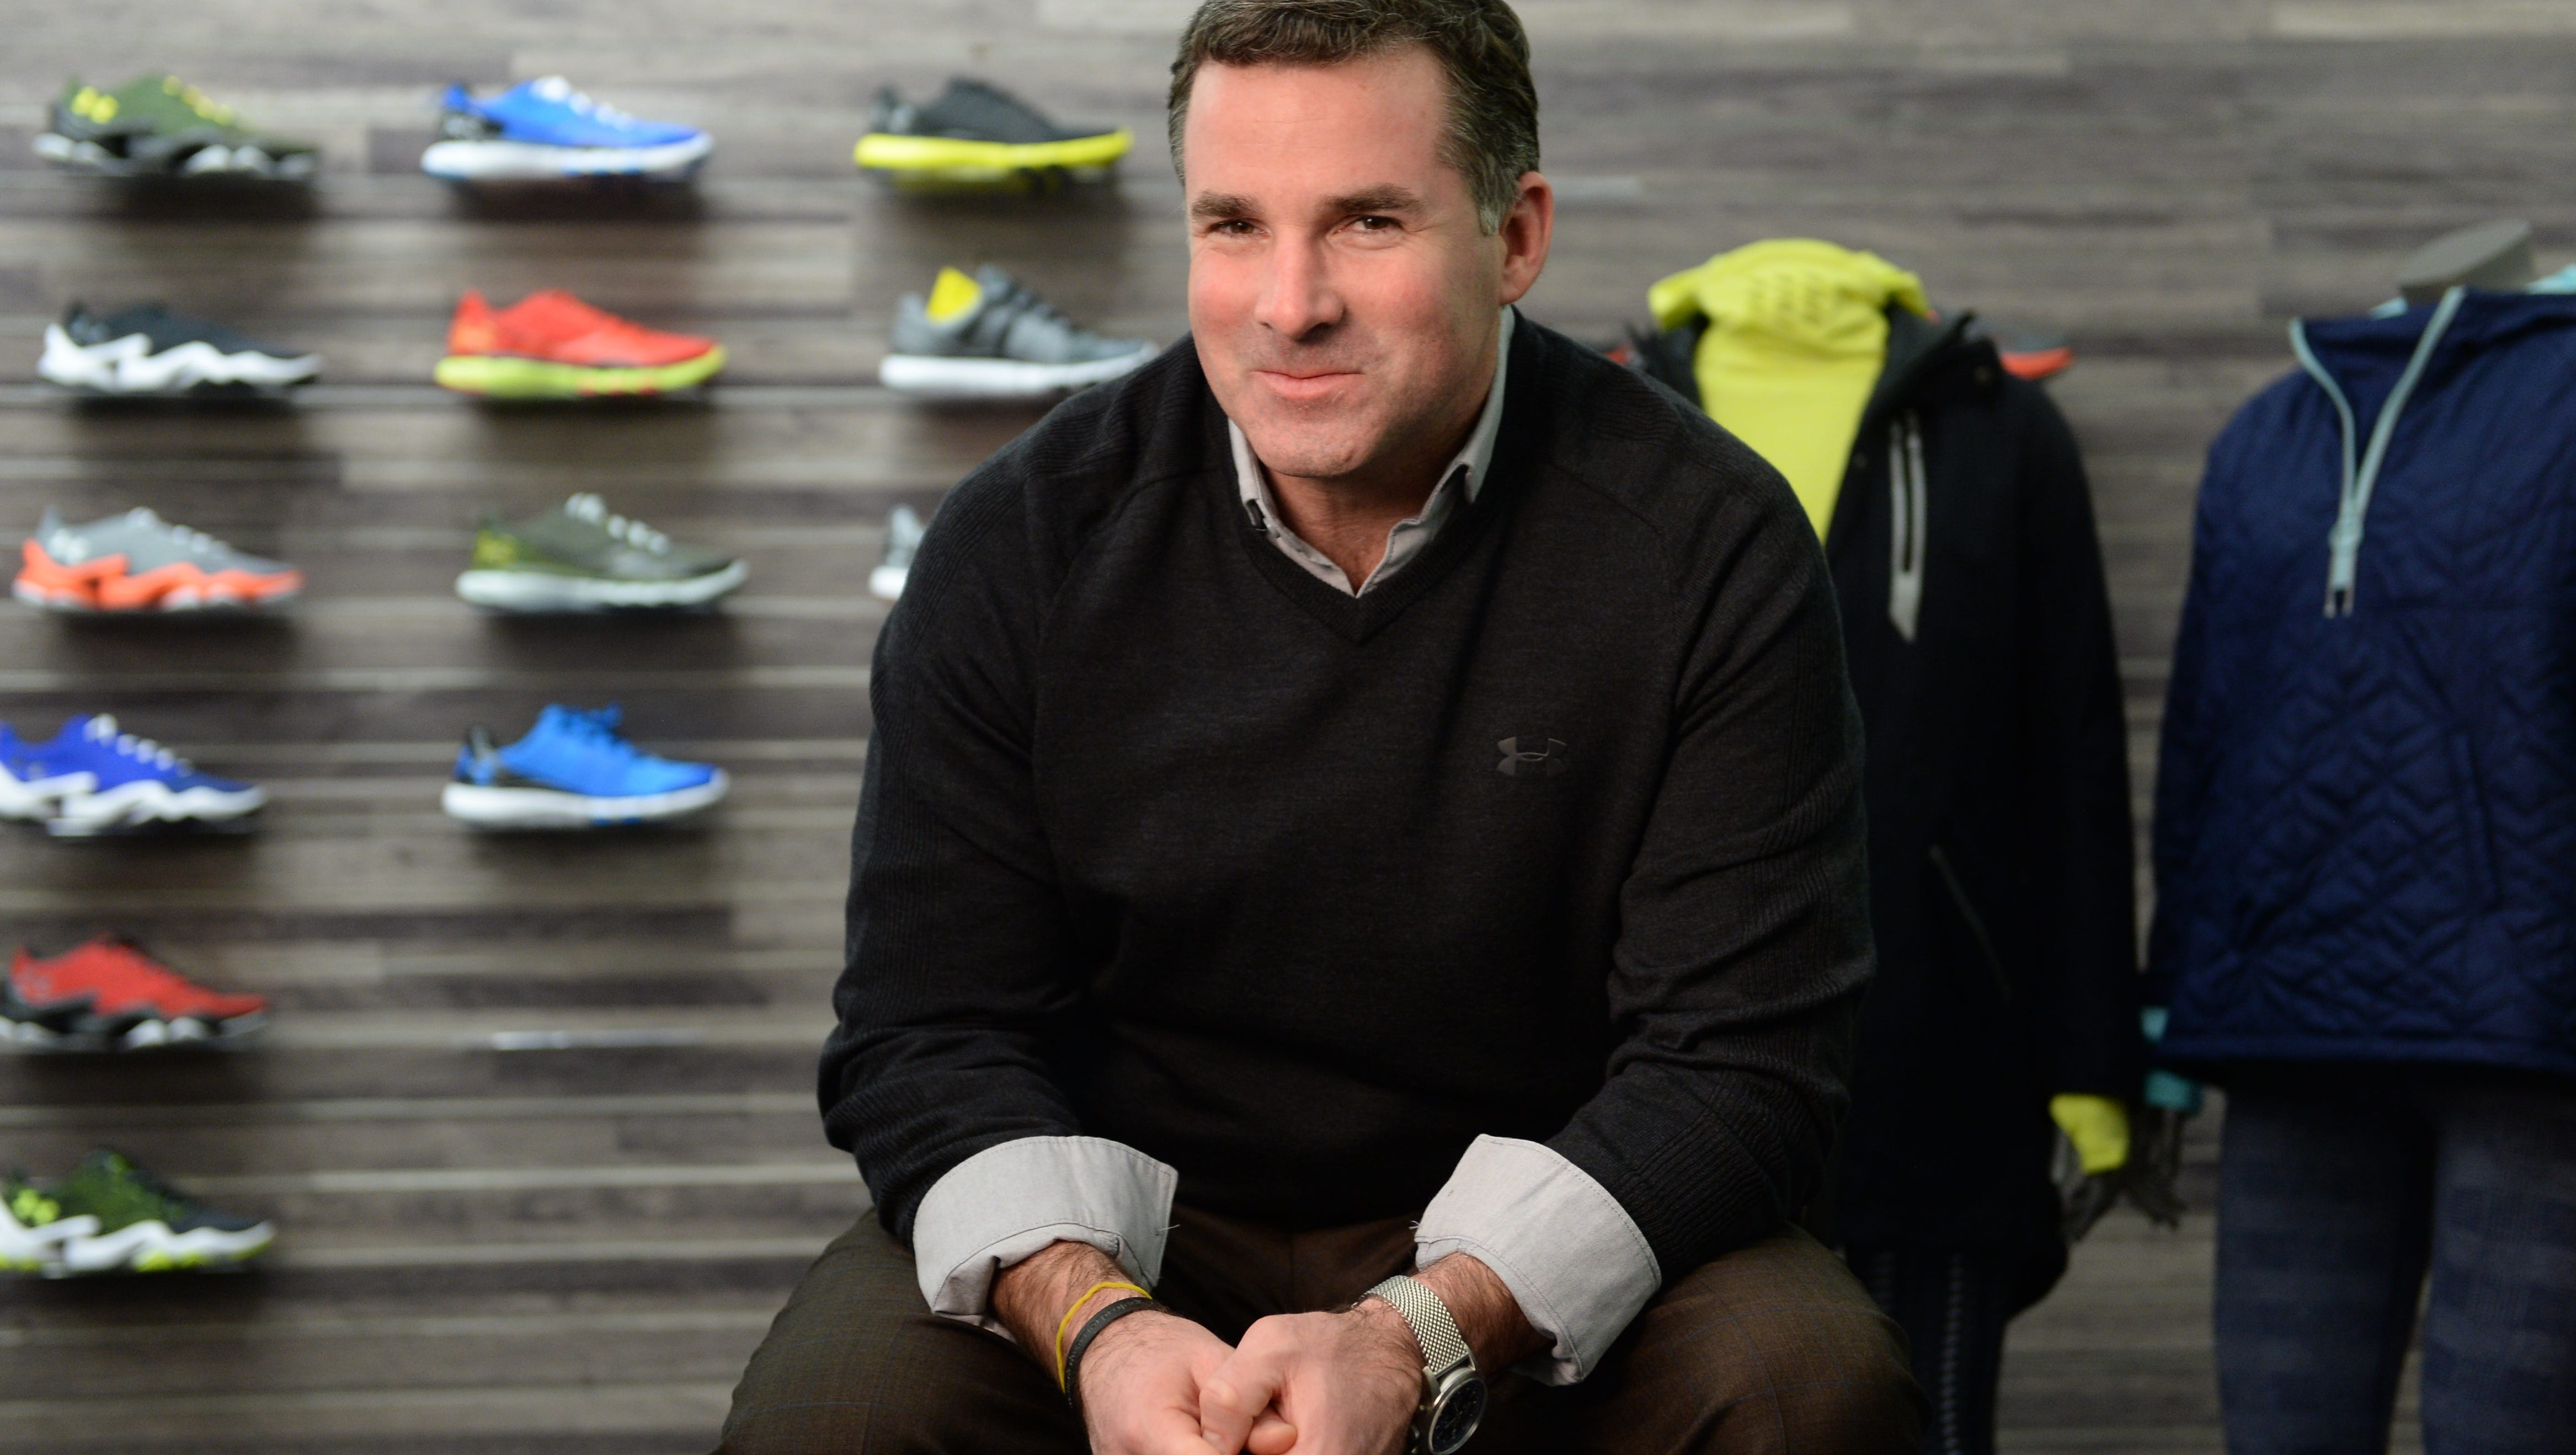 Under Armour Ceo Kevin Plank Steps Down Amid Turnaround Effort